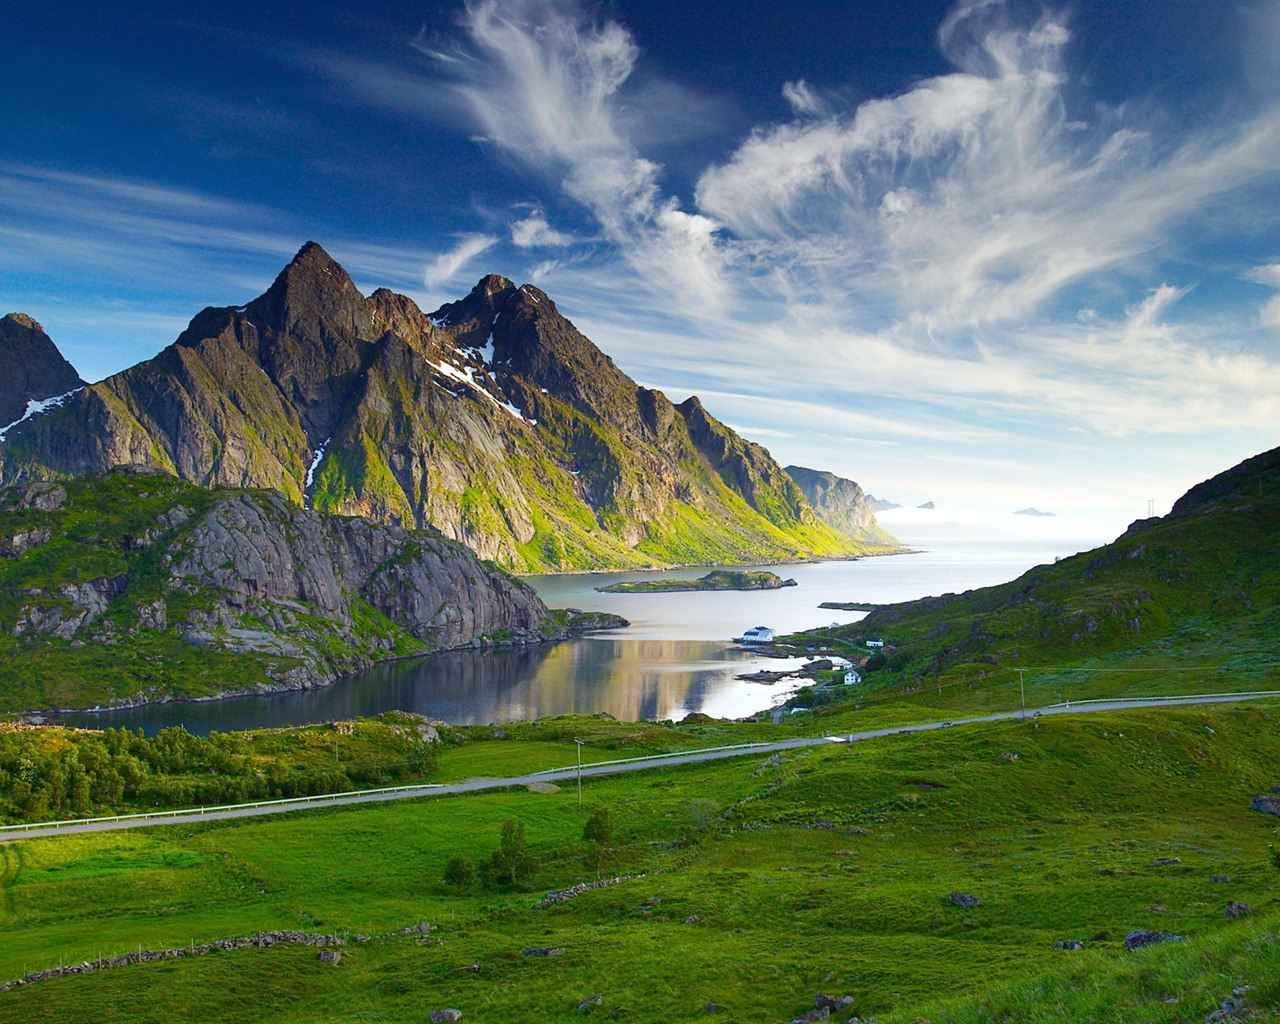 Windows 7 Wallpapers: Nordic Landscapes #1 - 1280x1024